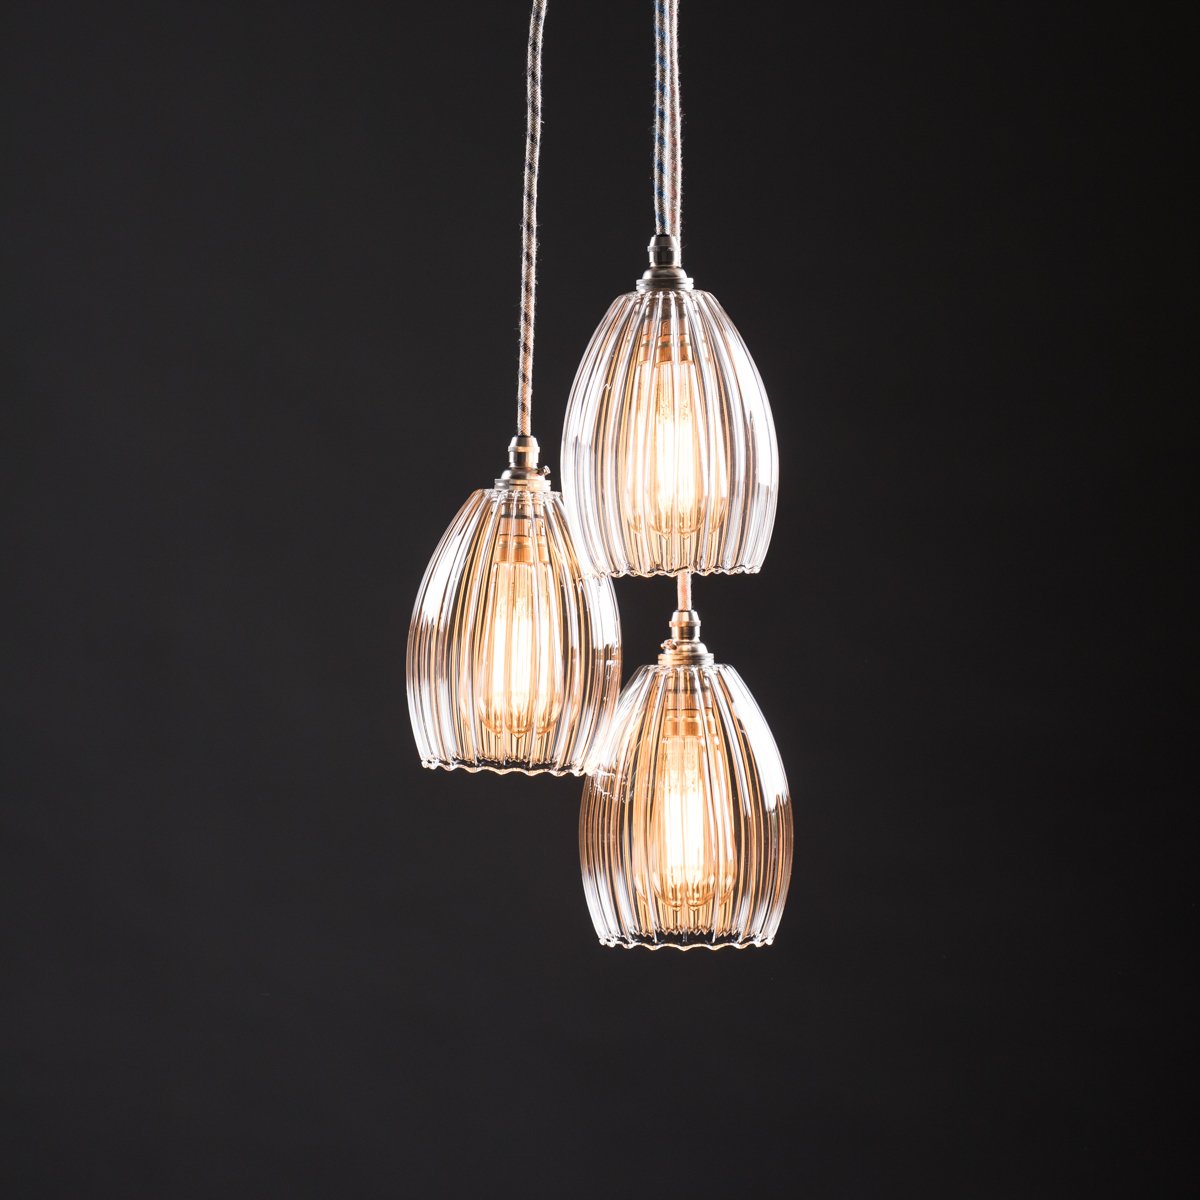 Molly Small 3 Cluster Glass Pendant Light 